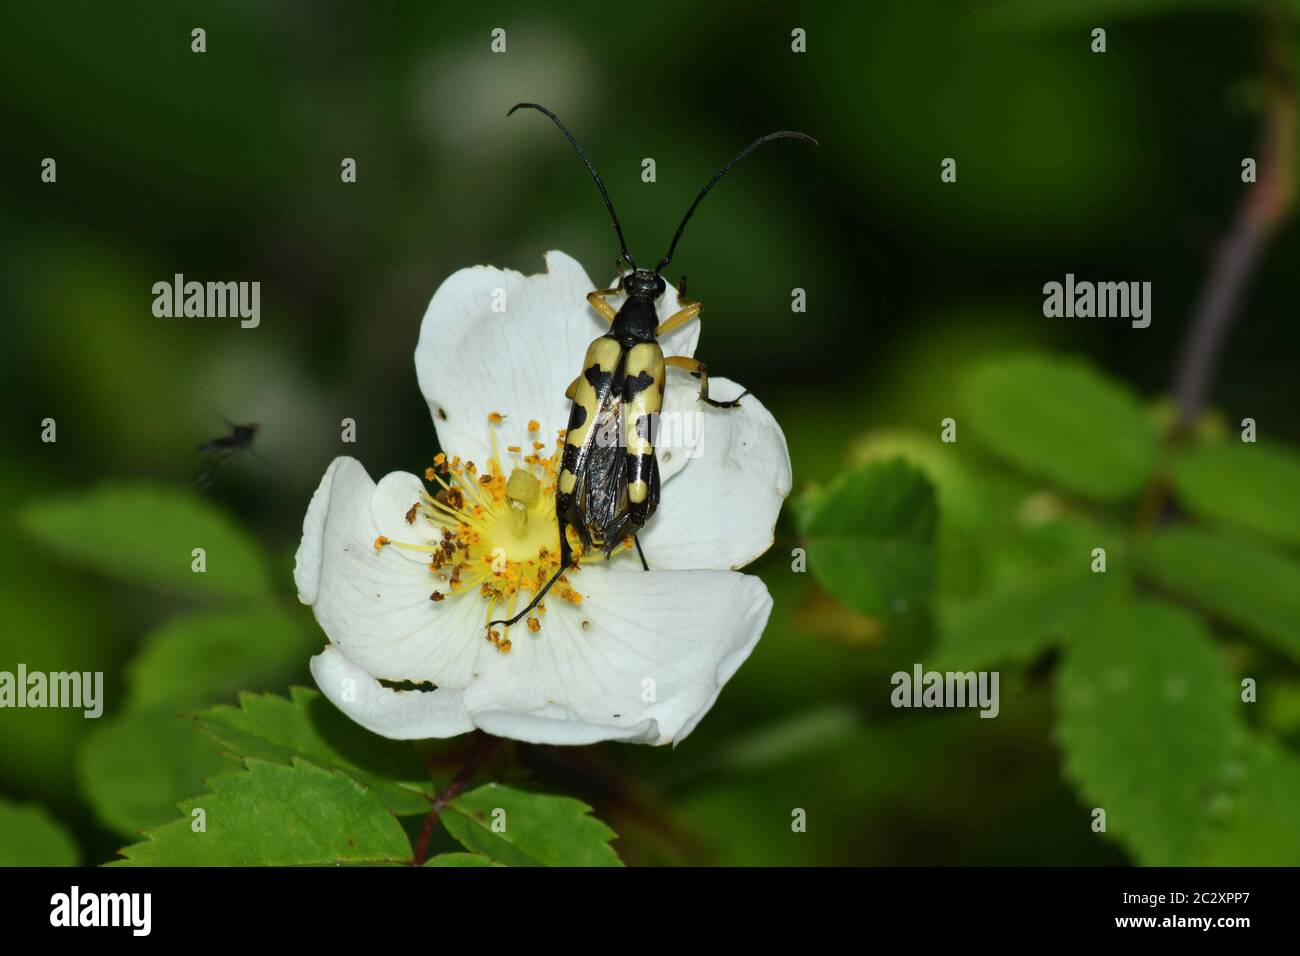 Beetle.Strangalia maculata, order Coleoptera.Longhorn Beetle,On a Dog Rose ' Rosa canina'. Yellow/ Black.May - August, seen on flowers in hedgerows an Stock Photo